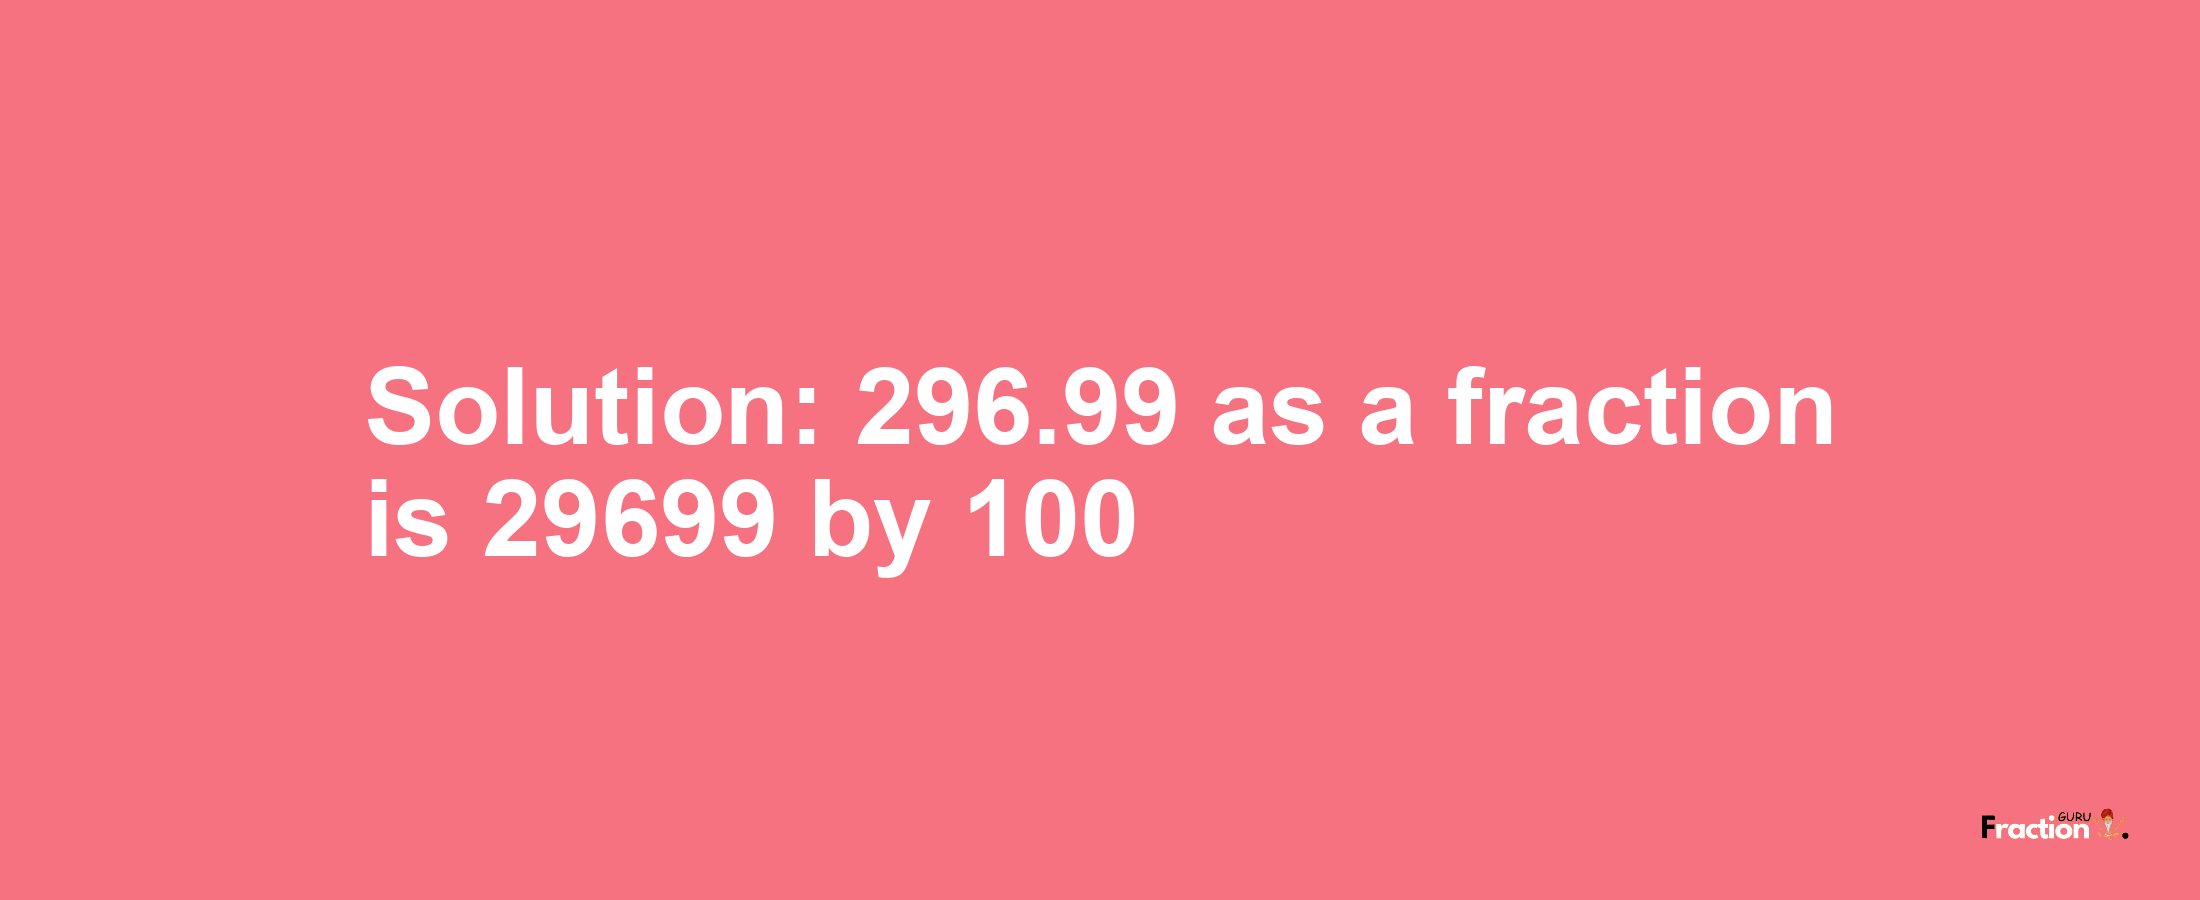 Solution:296.99 as a fraction is 29699/100